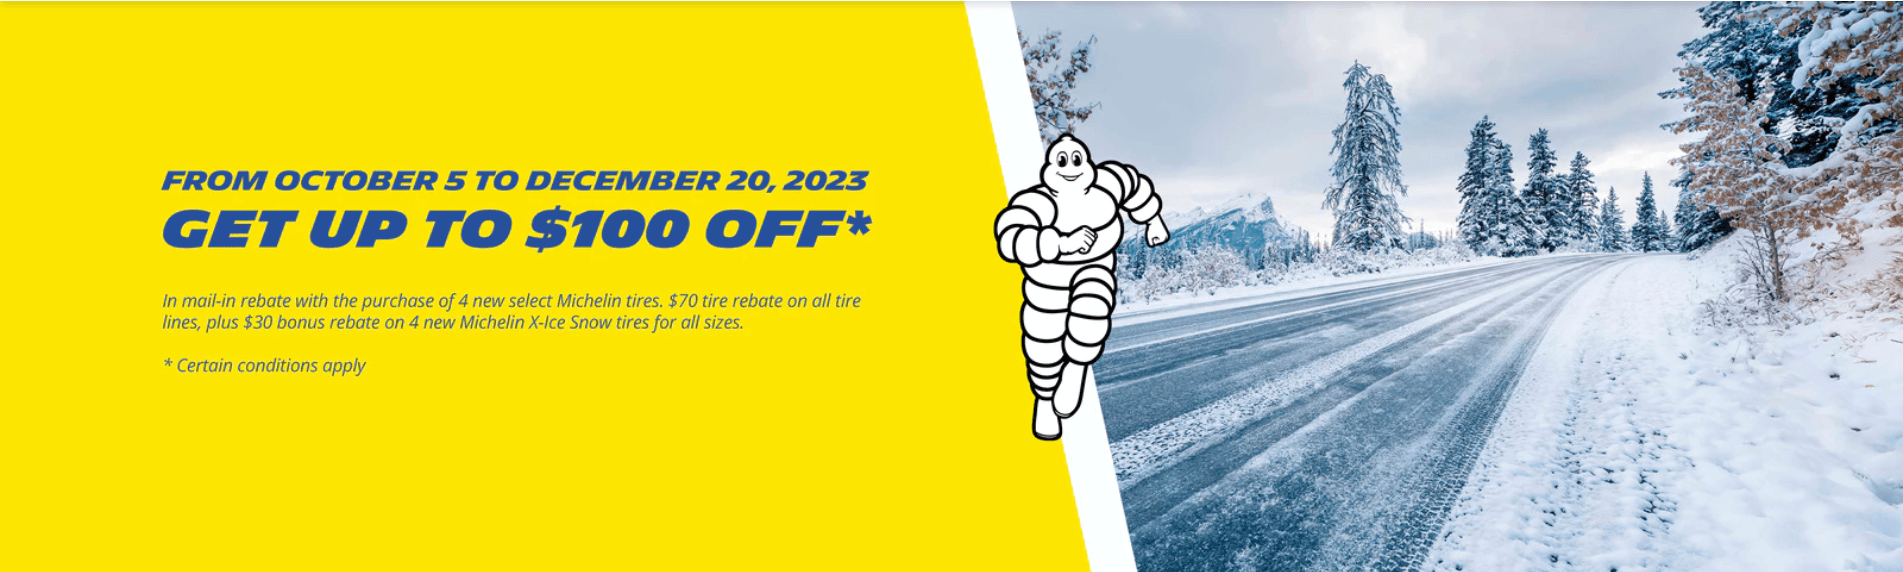 Michelin X-Ice Snow Mail-in rebate